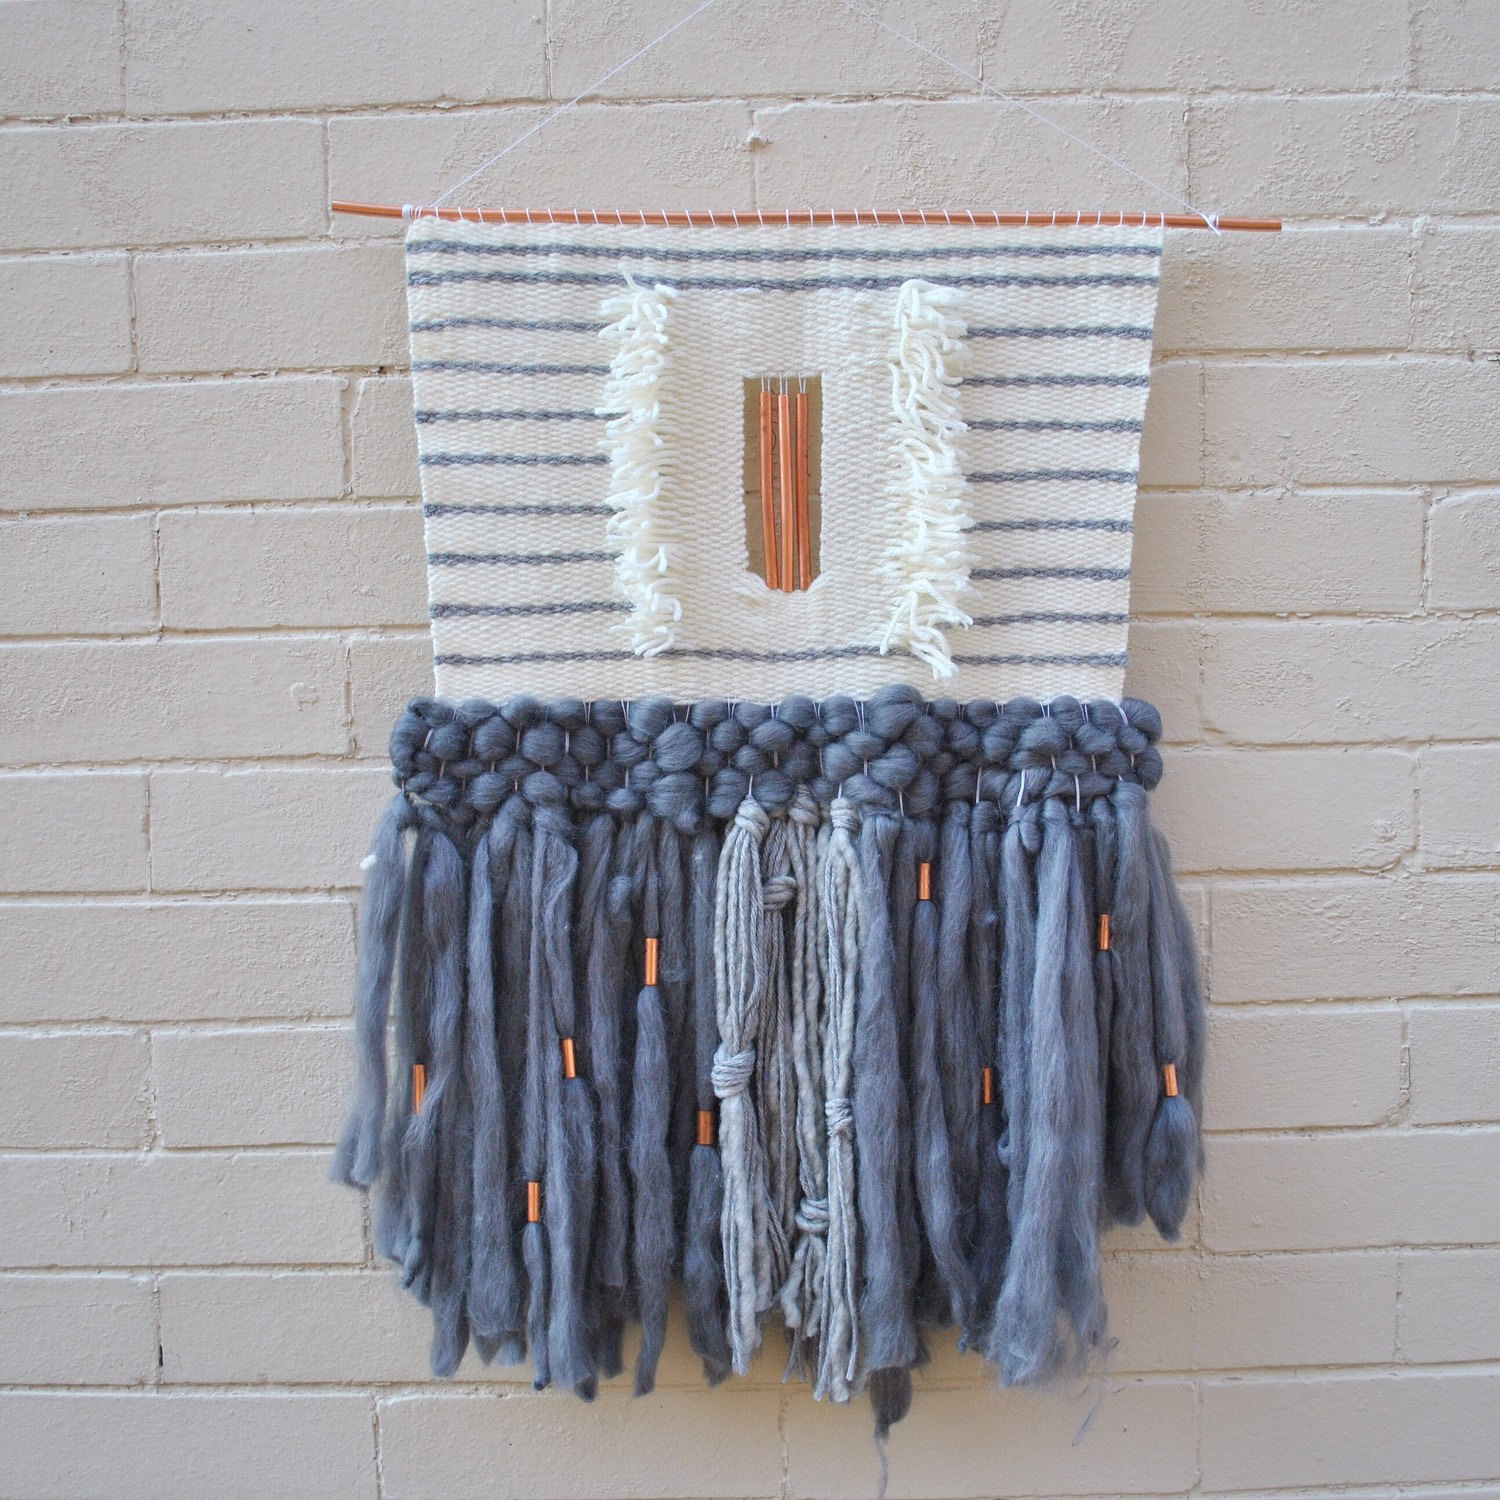 wall-hanging-textile16